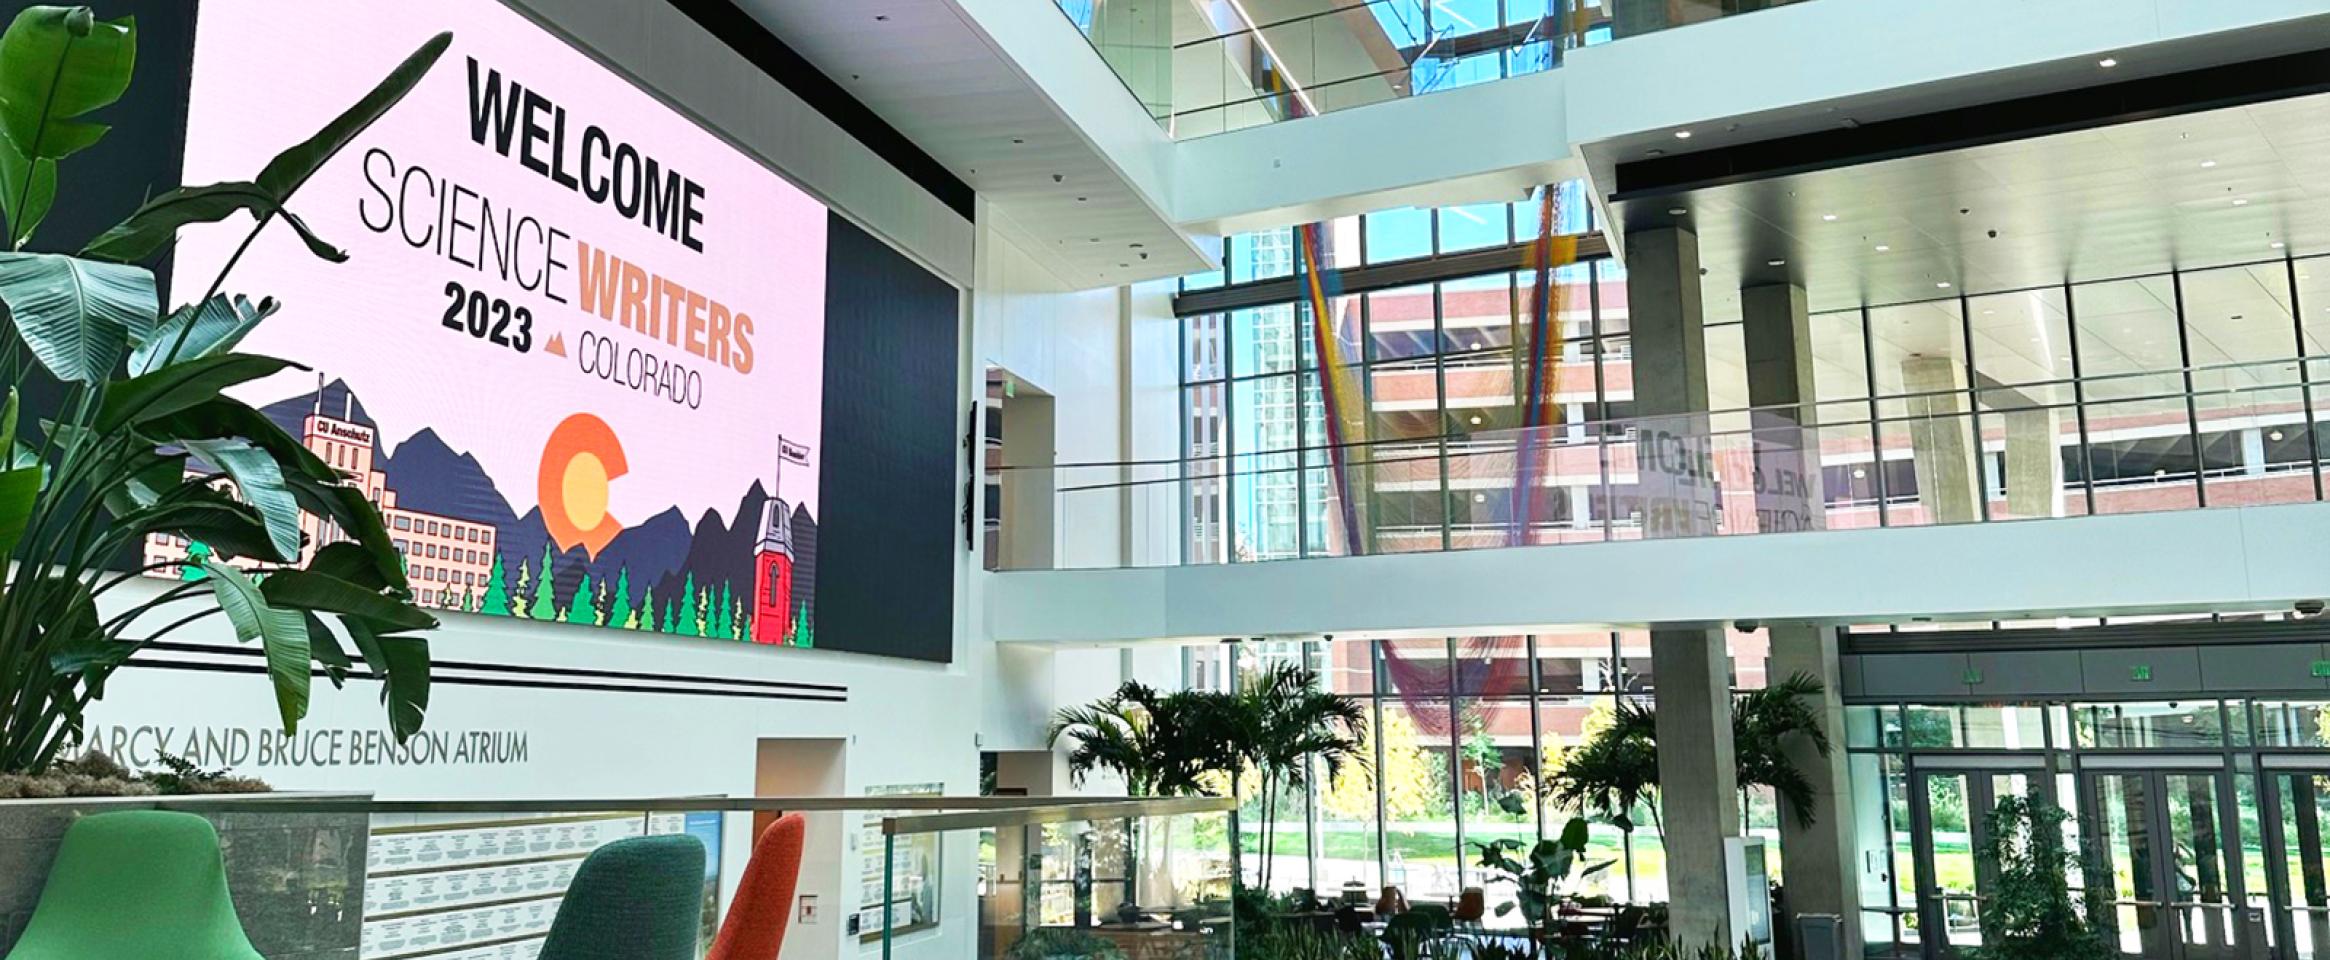 Horizontal photo of the spacious sunlit atrium of the Anschutz Health Sciences Building, with a giant wall screen displaying the Science Writers 2023 logo. Chairs are seen in the foreground, and deeper in the background. Photo by Christina O'Haver.